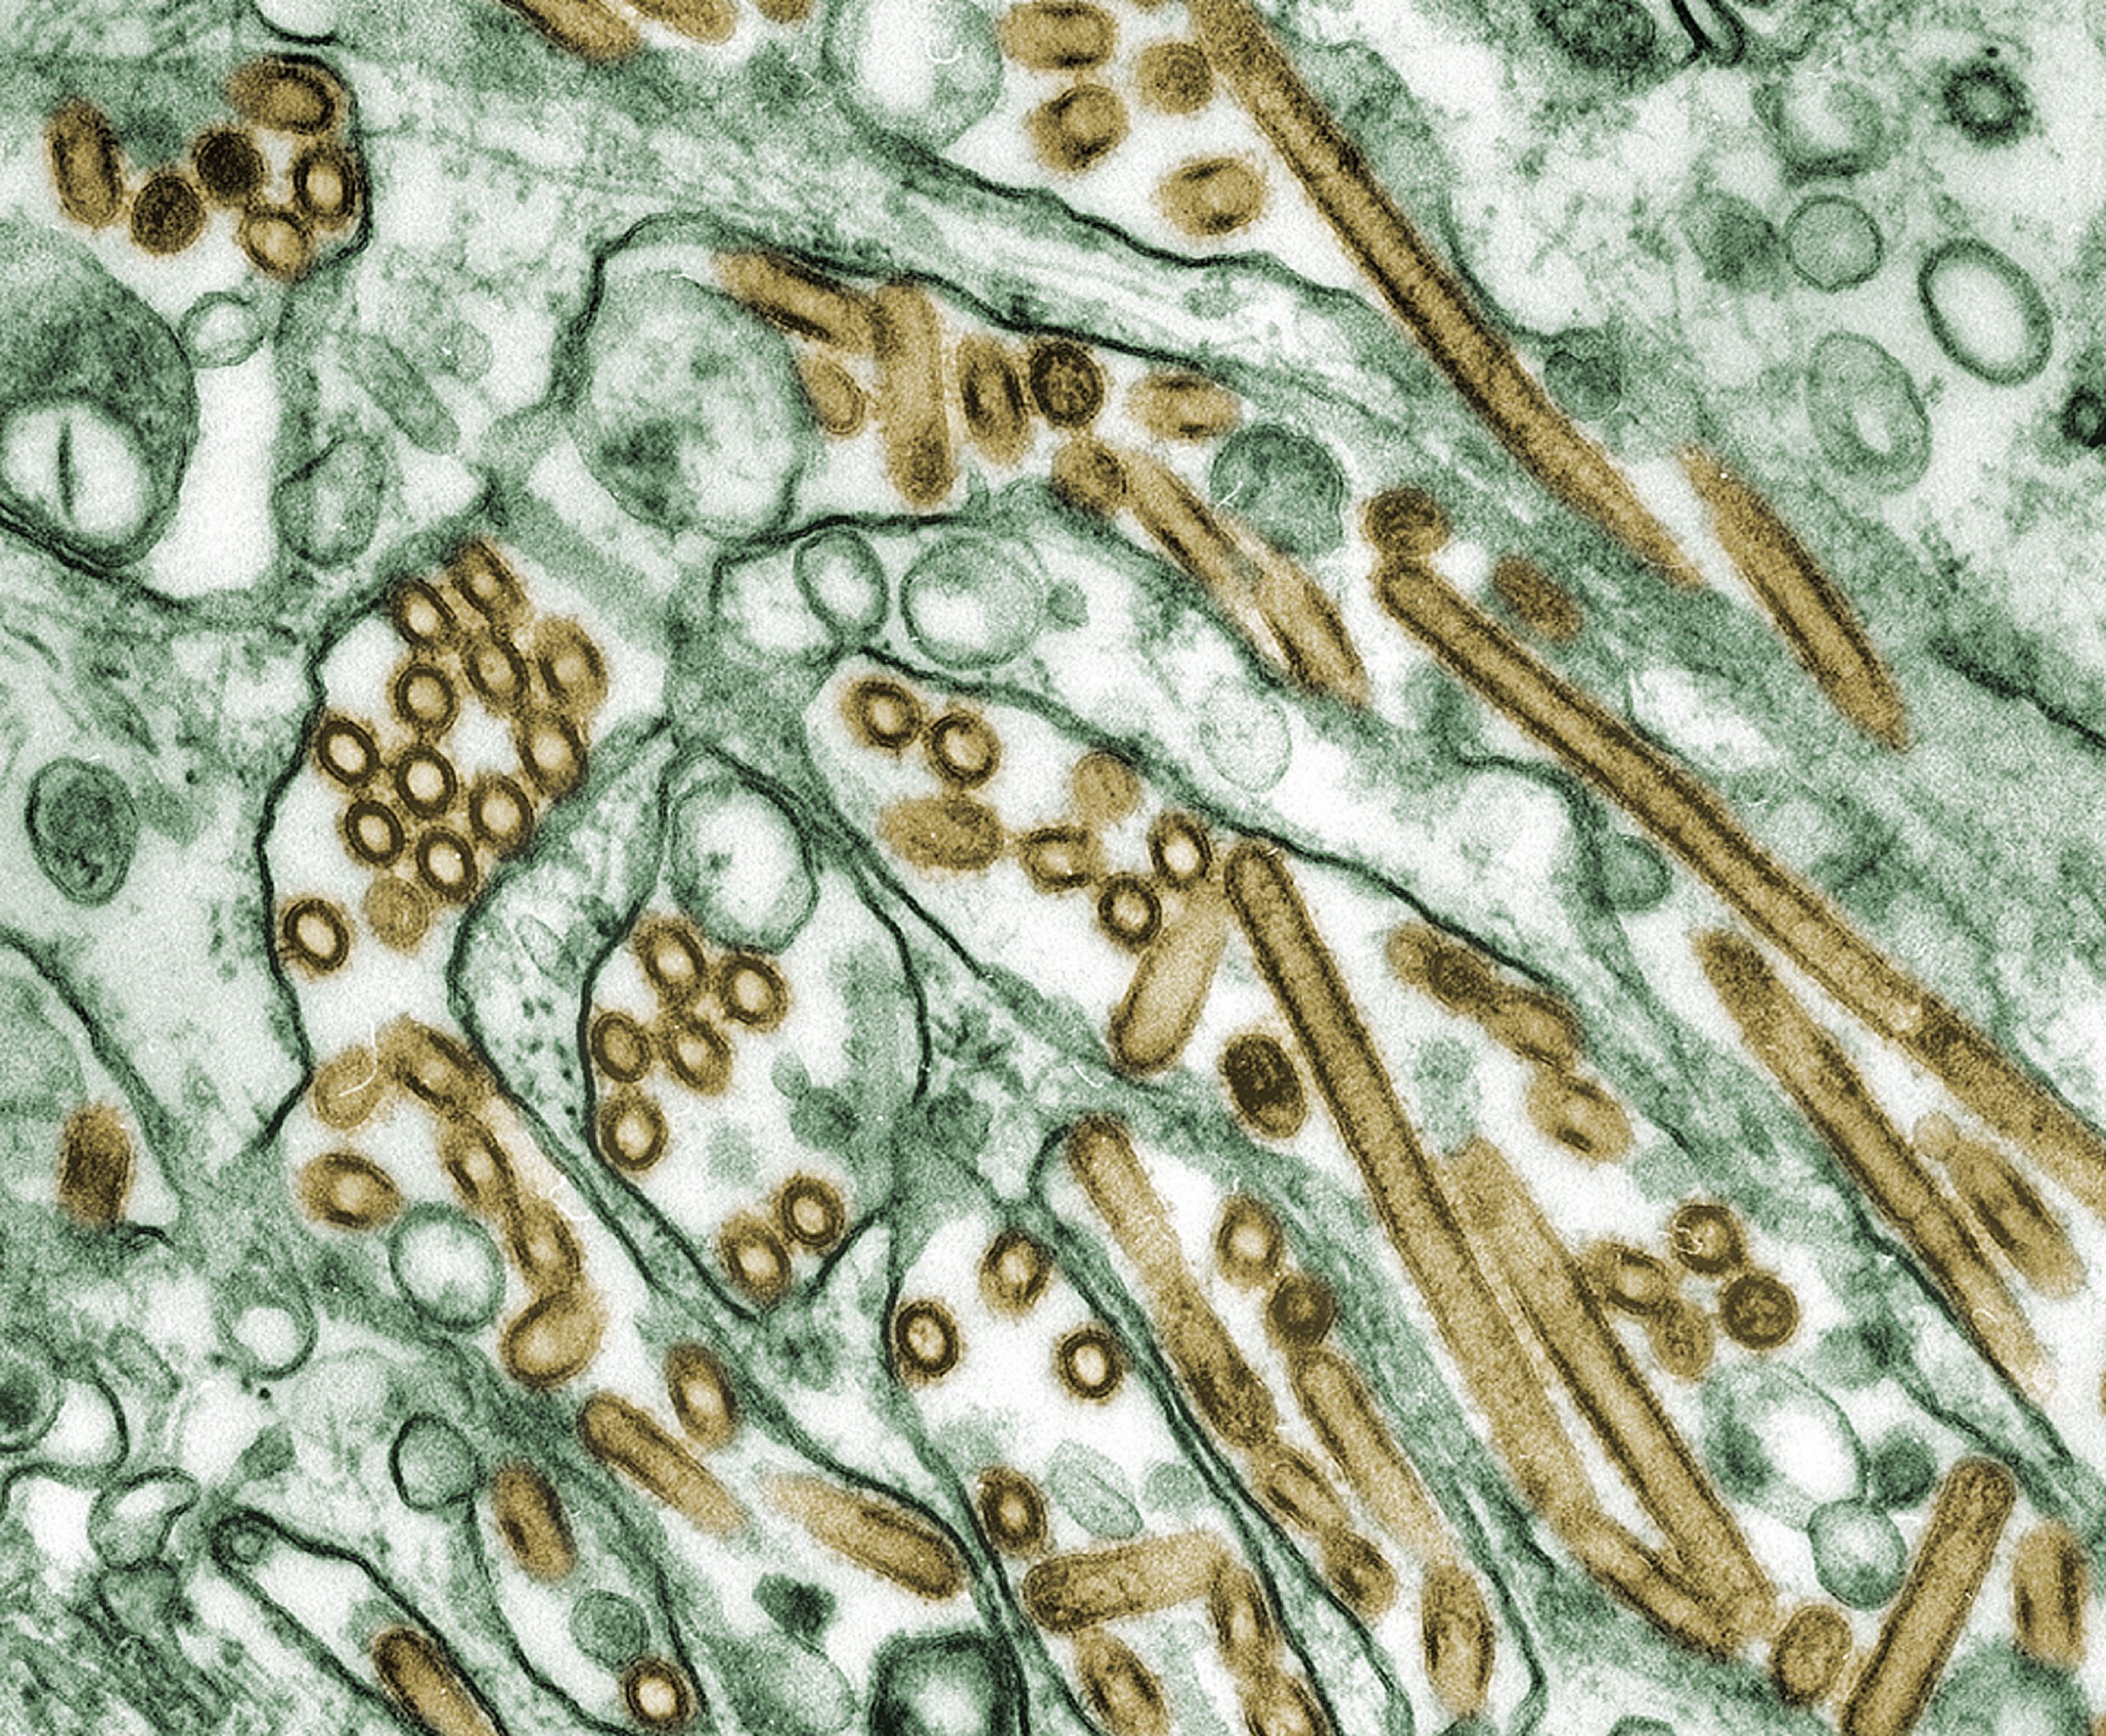 Colorized transmission electron micrograph of Avian influenza A H5N1 viruses